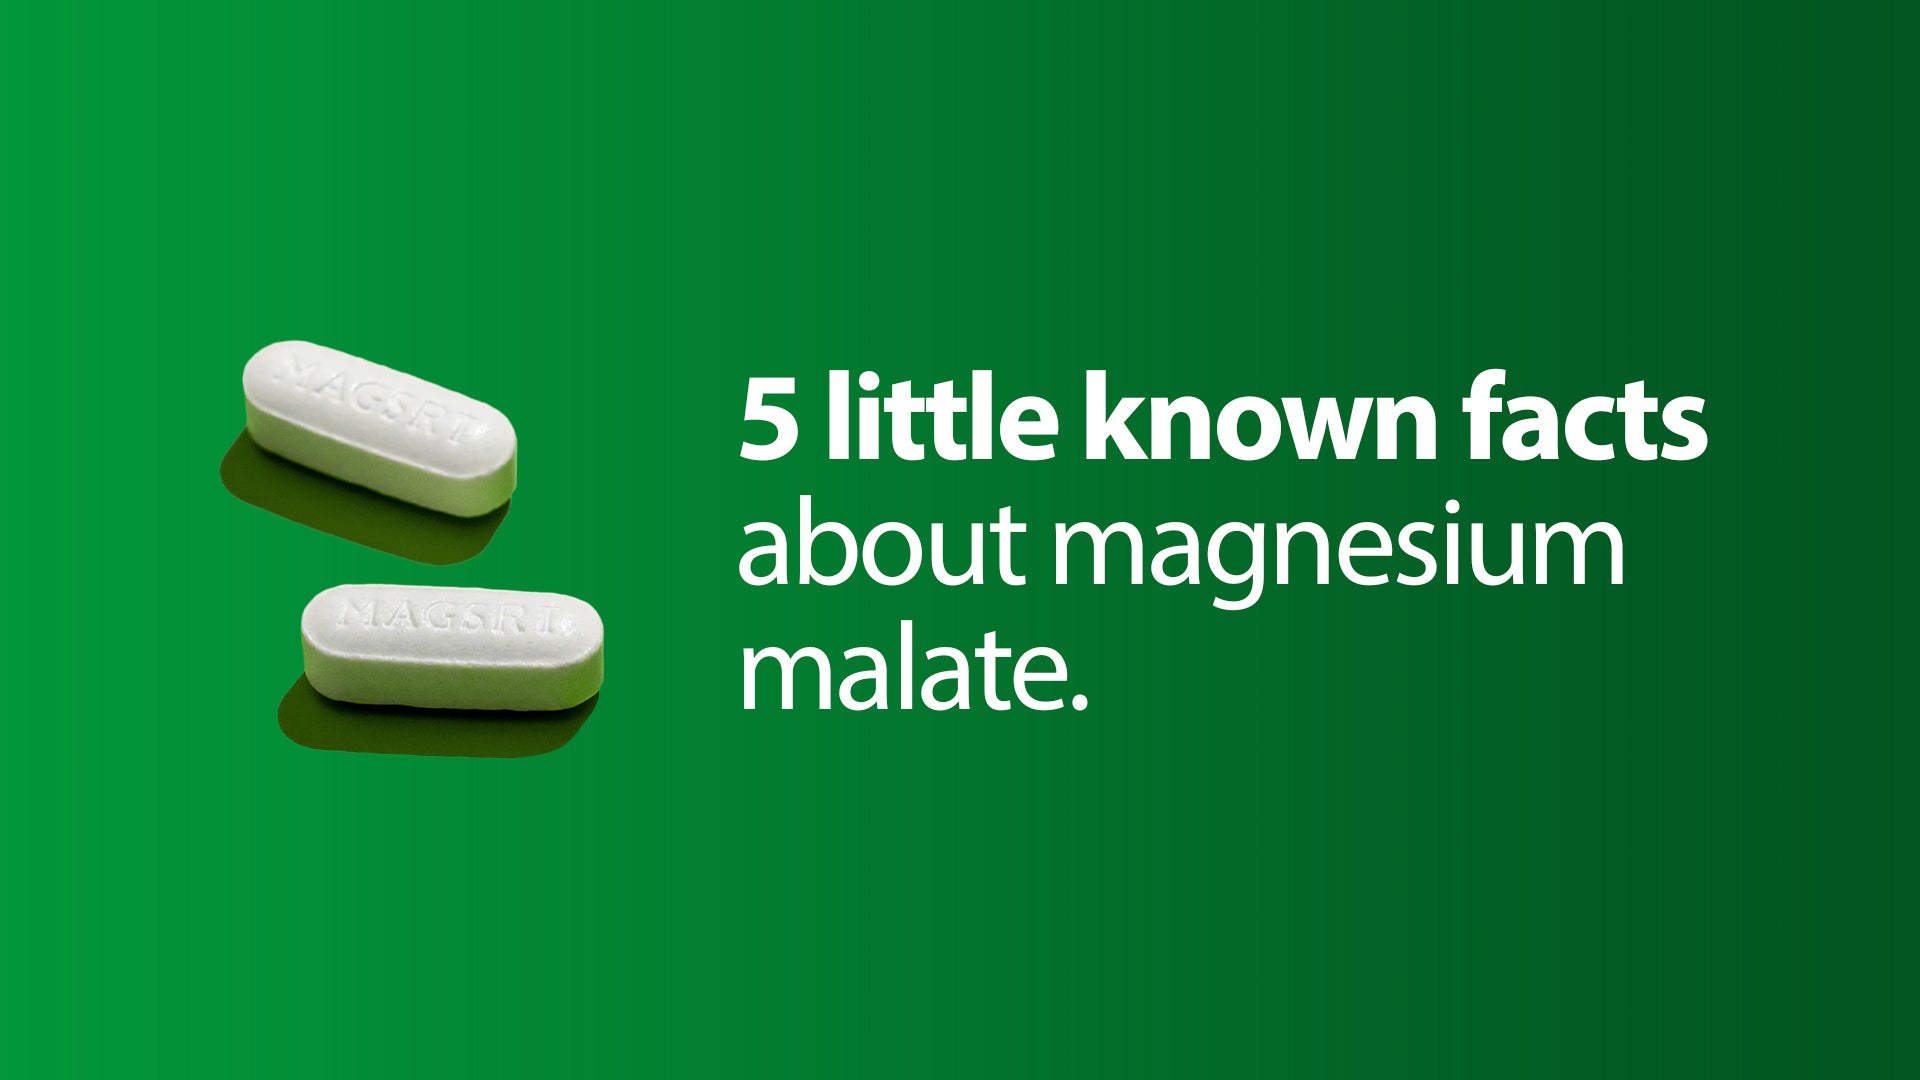 5 Little Known Facts About Magnesium Malate